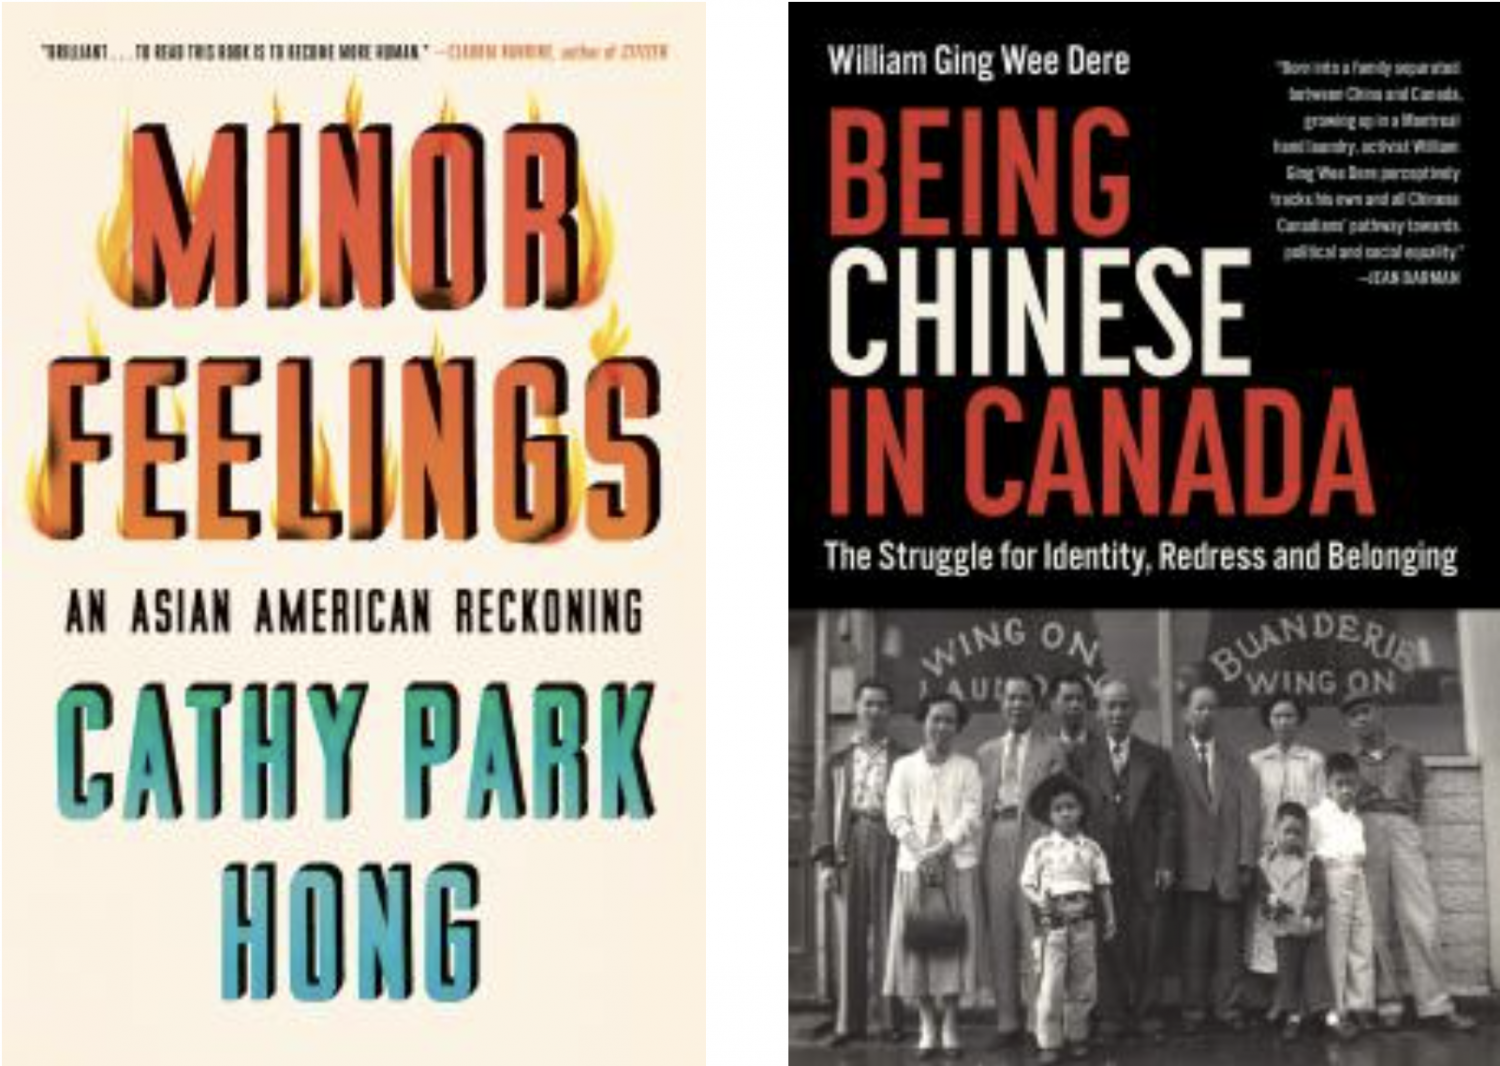 Minor feelings and Being Chinese in Canada book covers